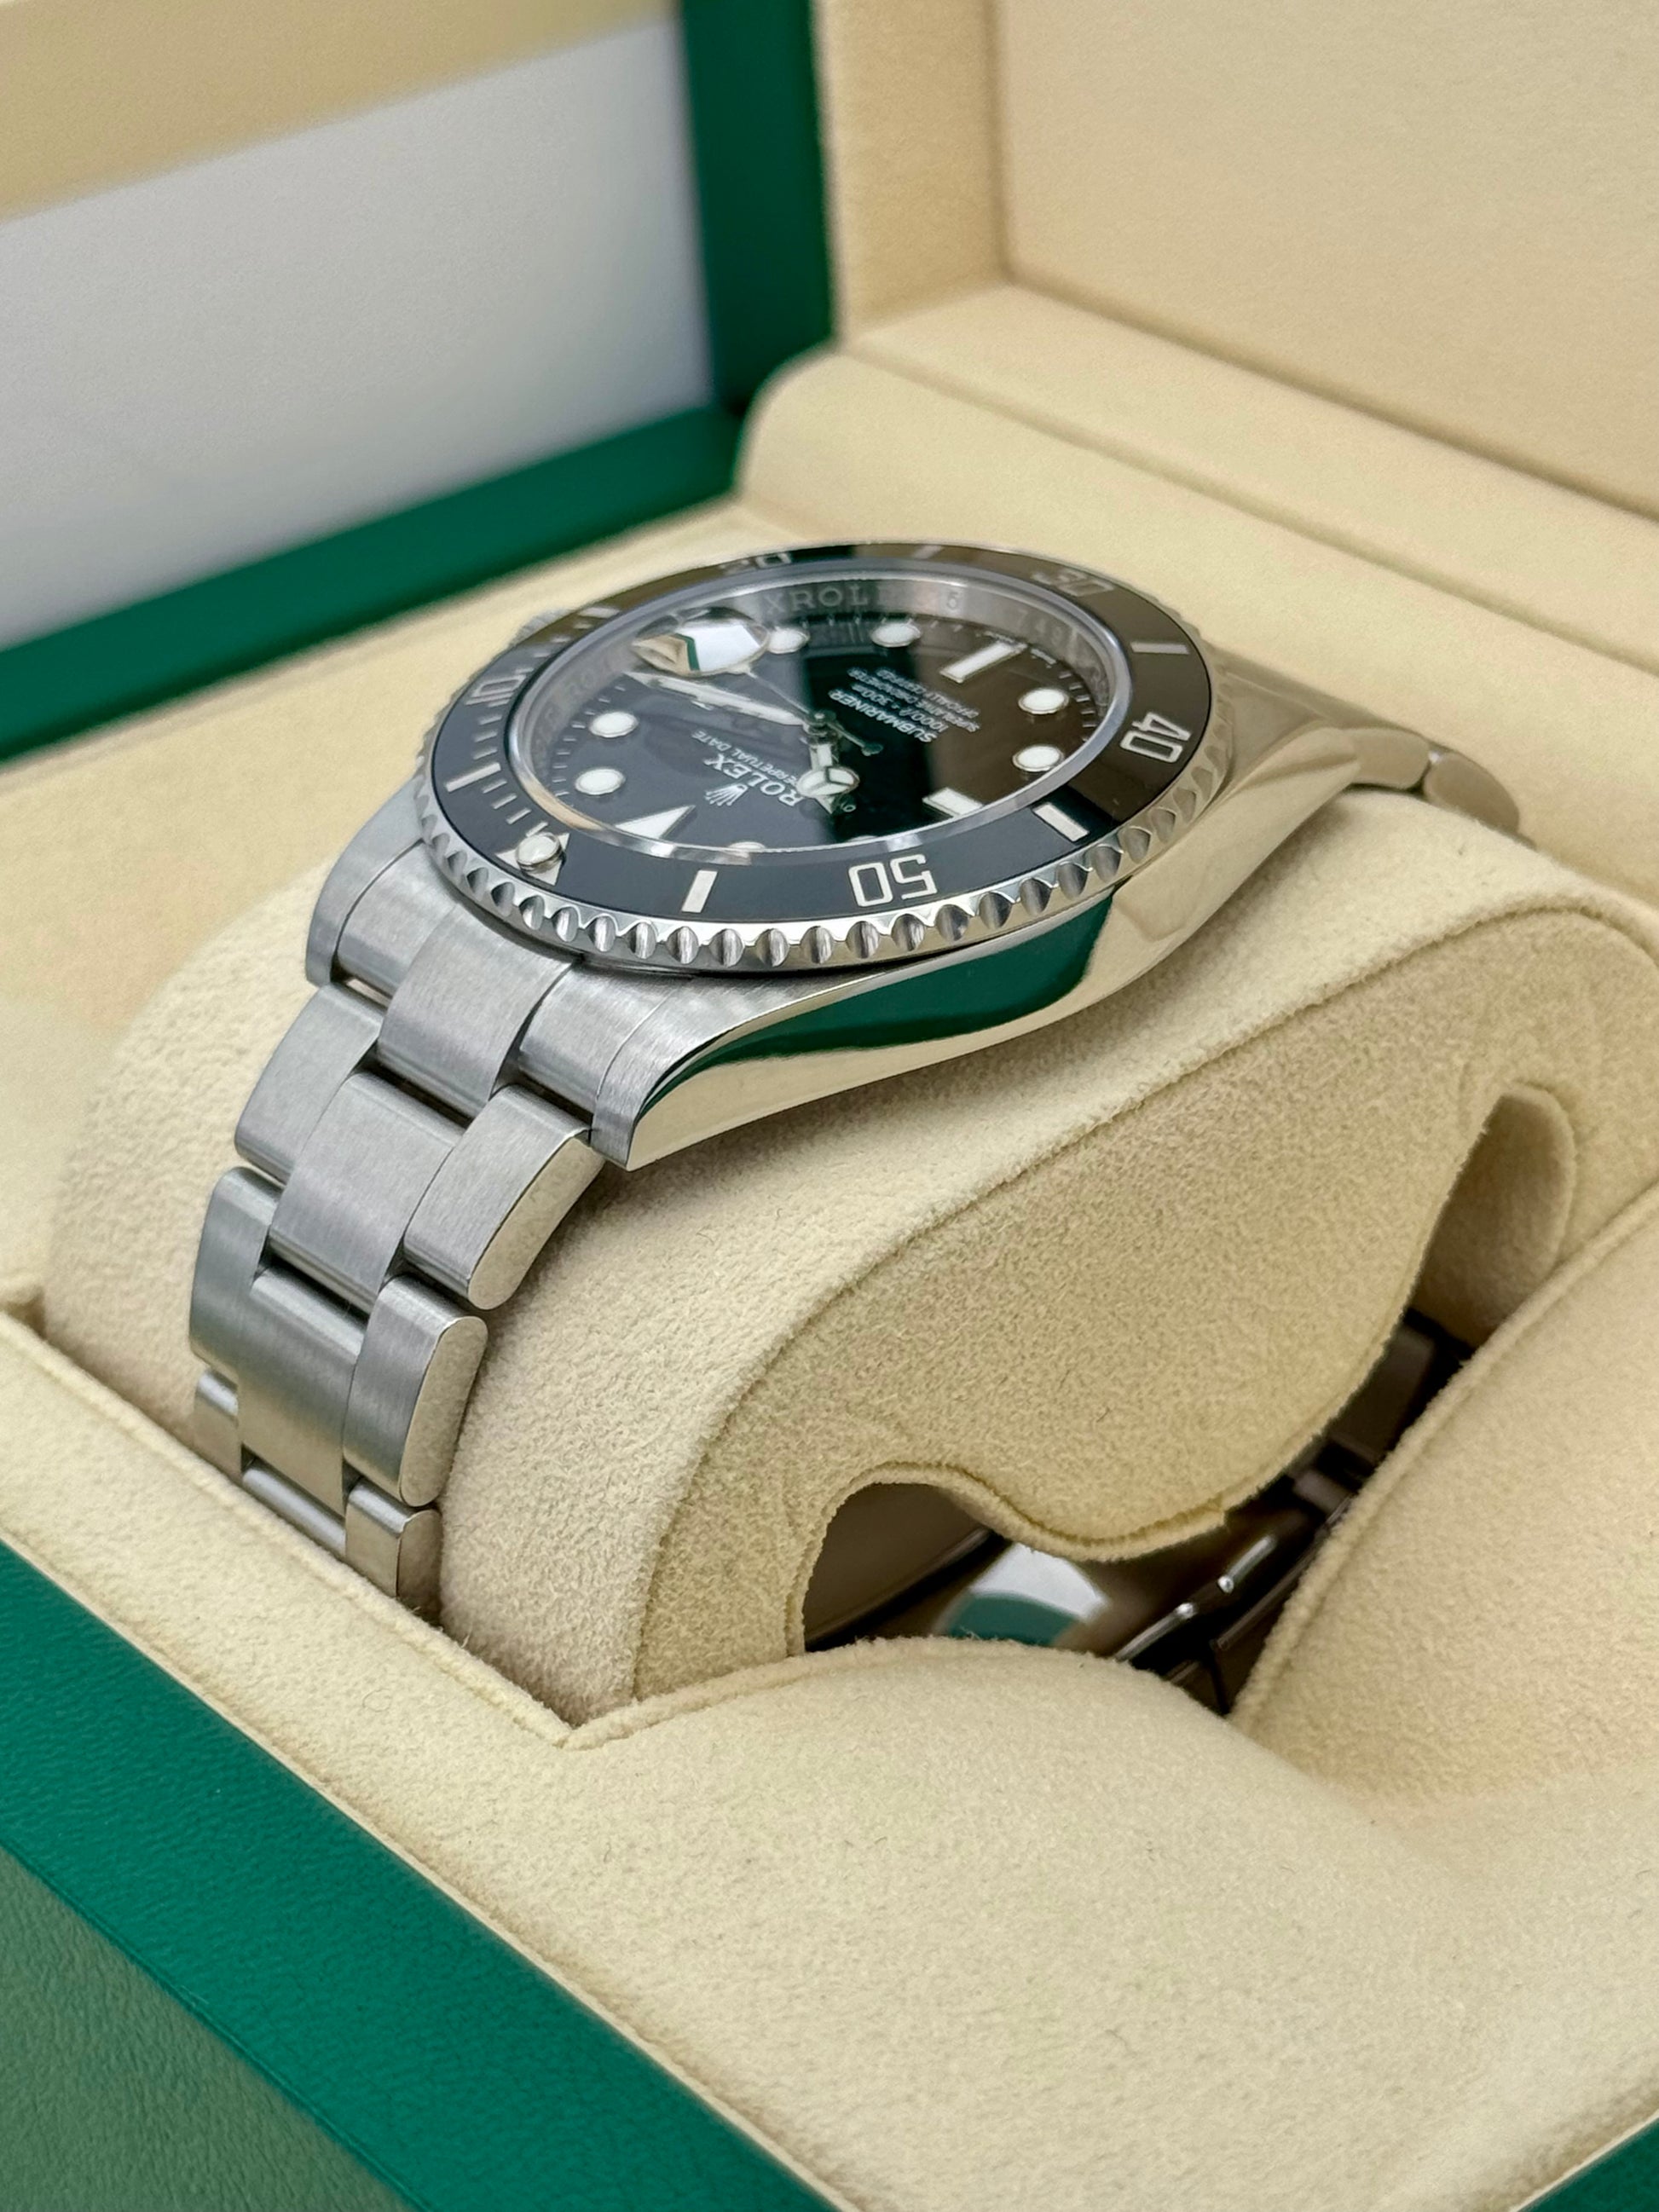 2021 Rolex Submariner Date 41mm 126610LN Stainless Steel Black Dial - MyWatchLLC